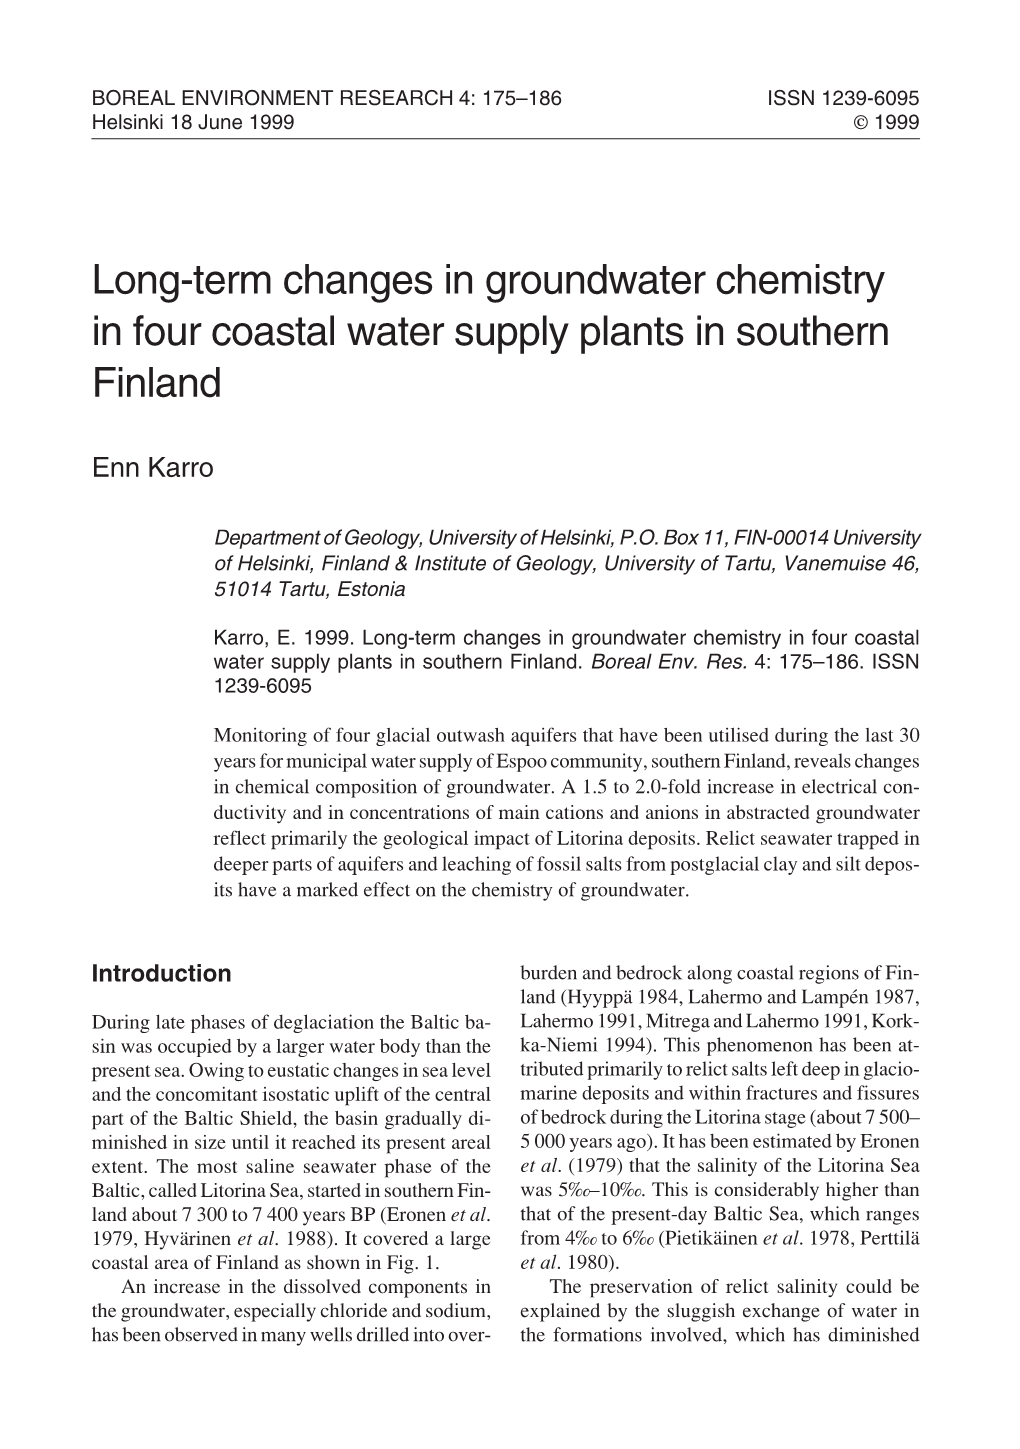 Long-Term Changes in Groundwater Chemistry in Four Coastal Water Supply Plants in Southern Finland